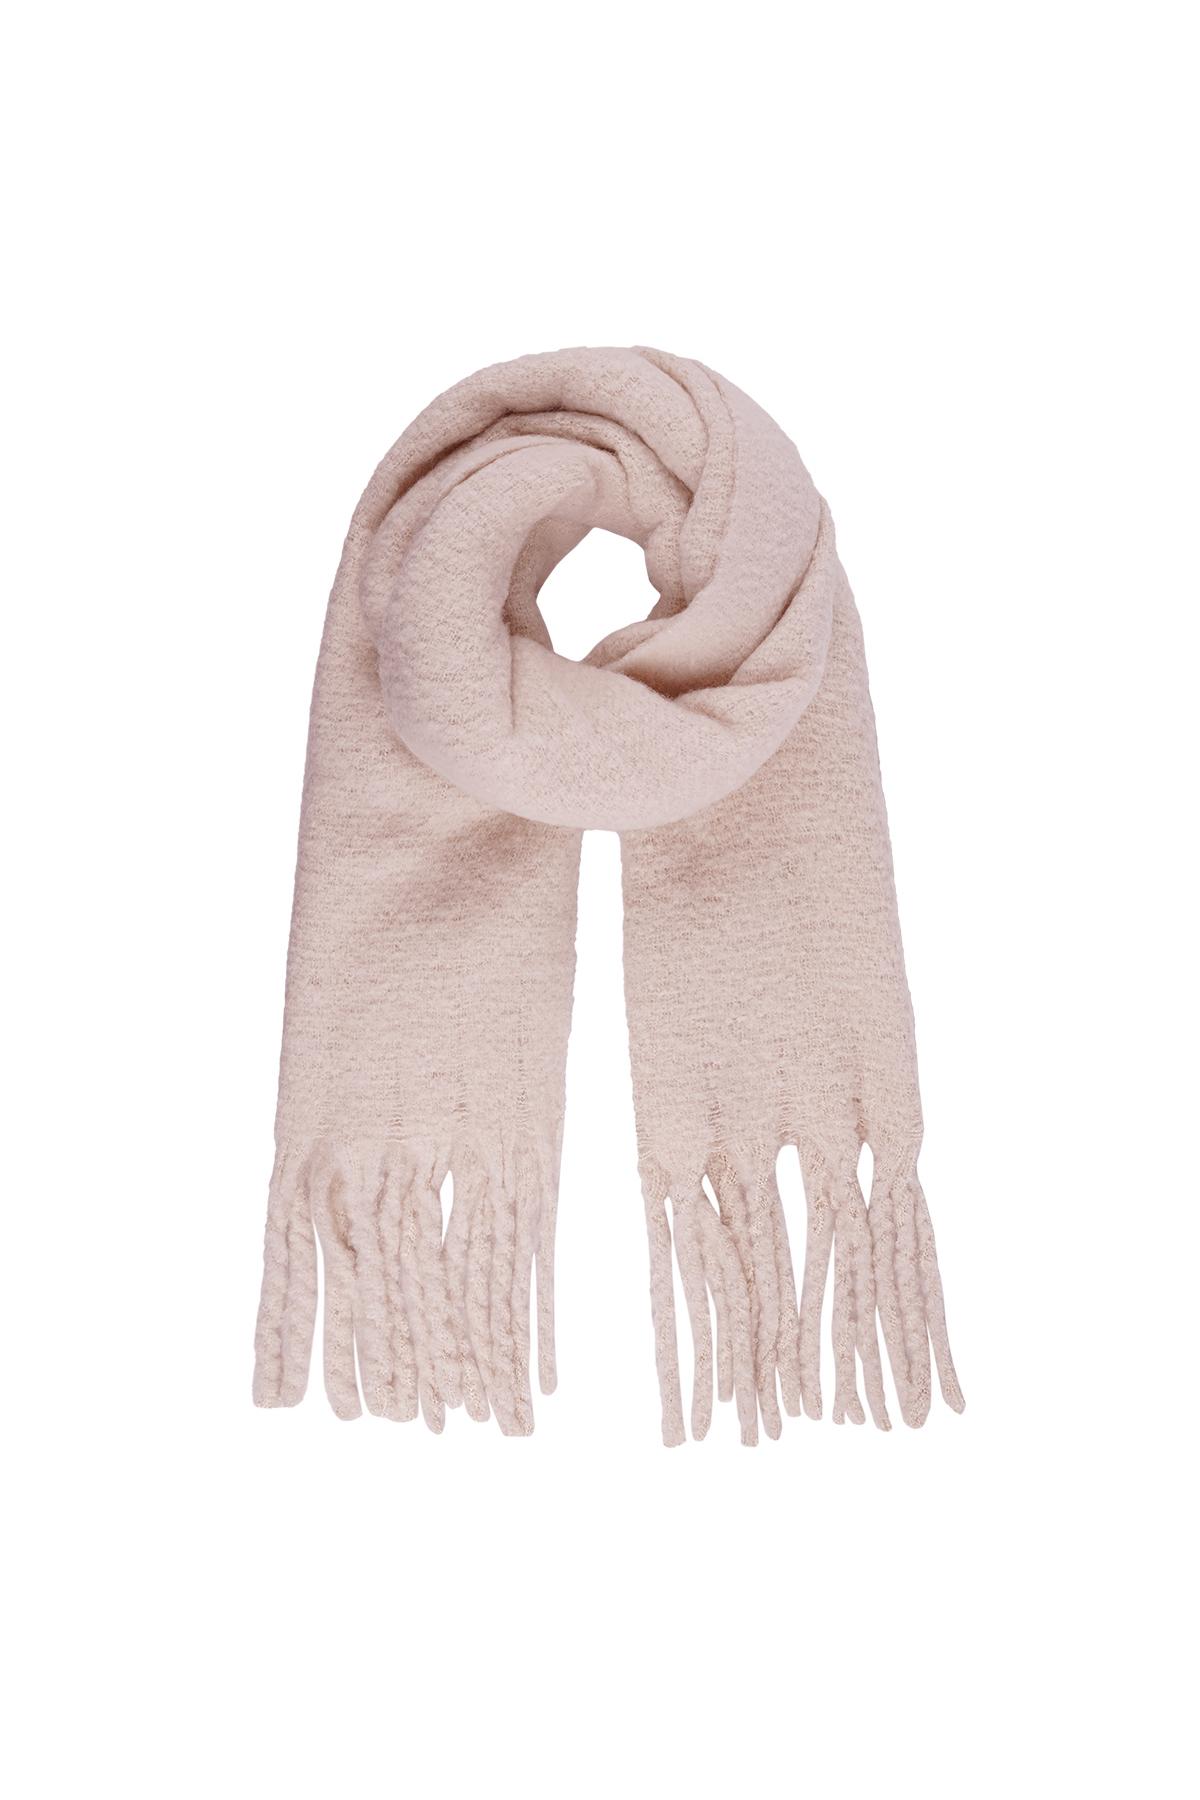 Warm winter scarf solid color light pink Pale Pink Polyester 